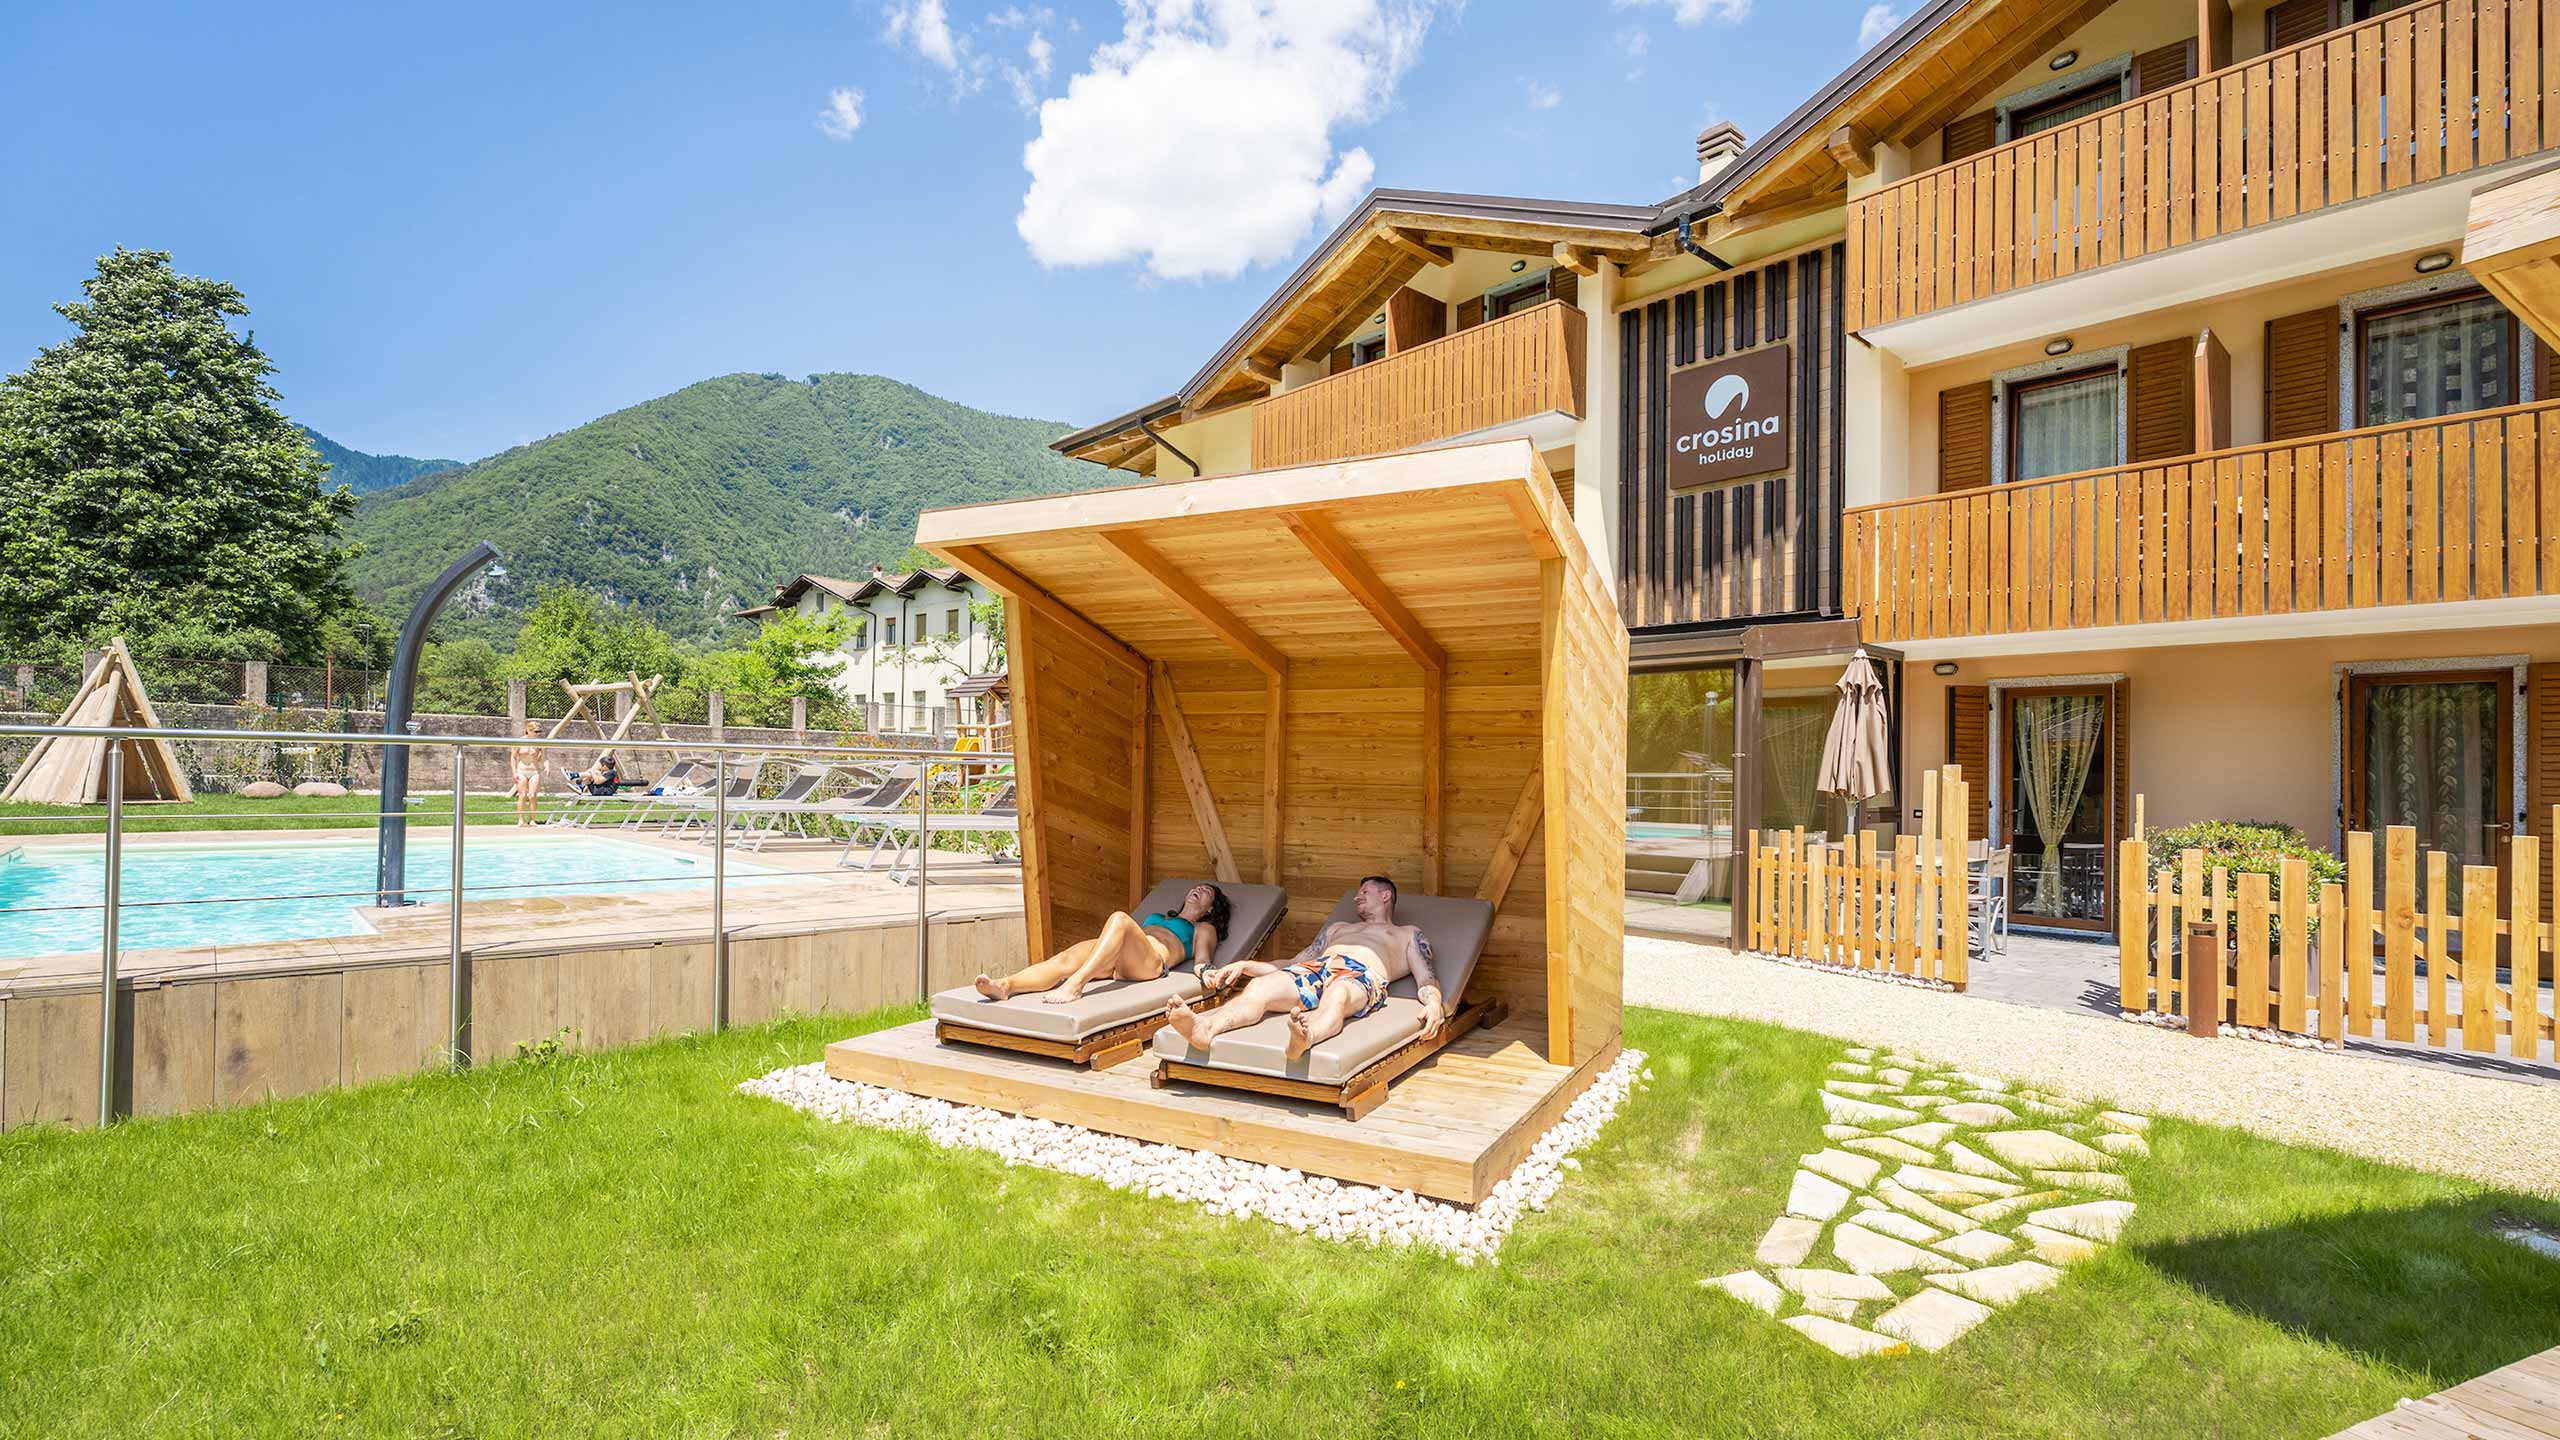 Crosina Holiday - apartment near Lake Ledro in Trentino for a family or family holiday Welcome to Residence Toli